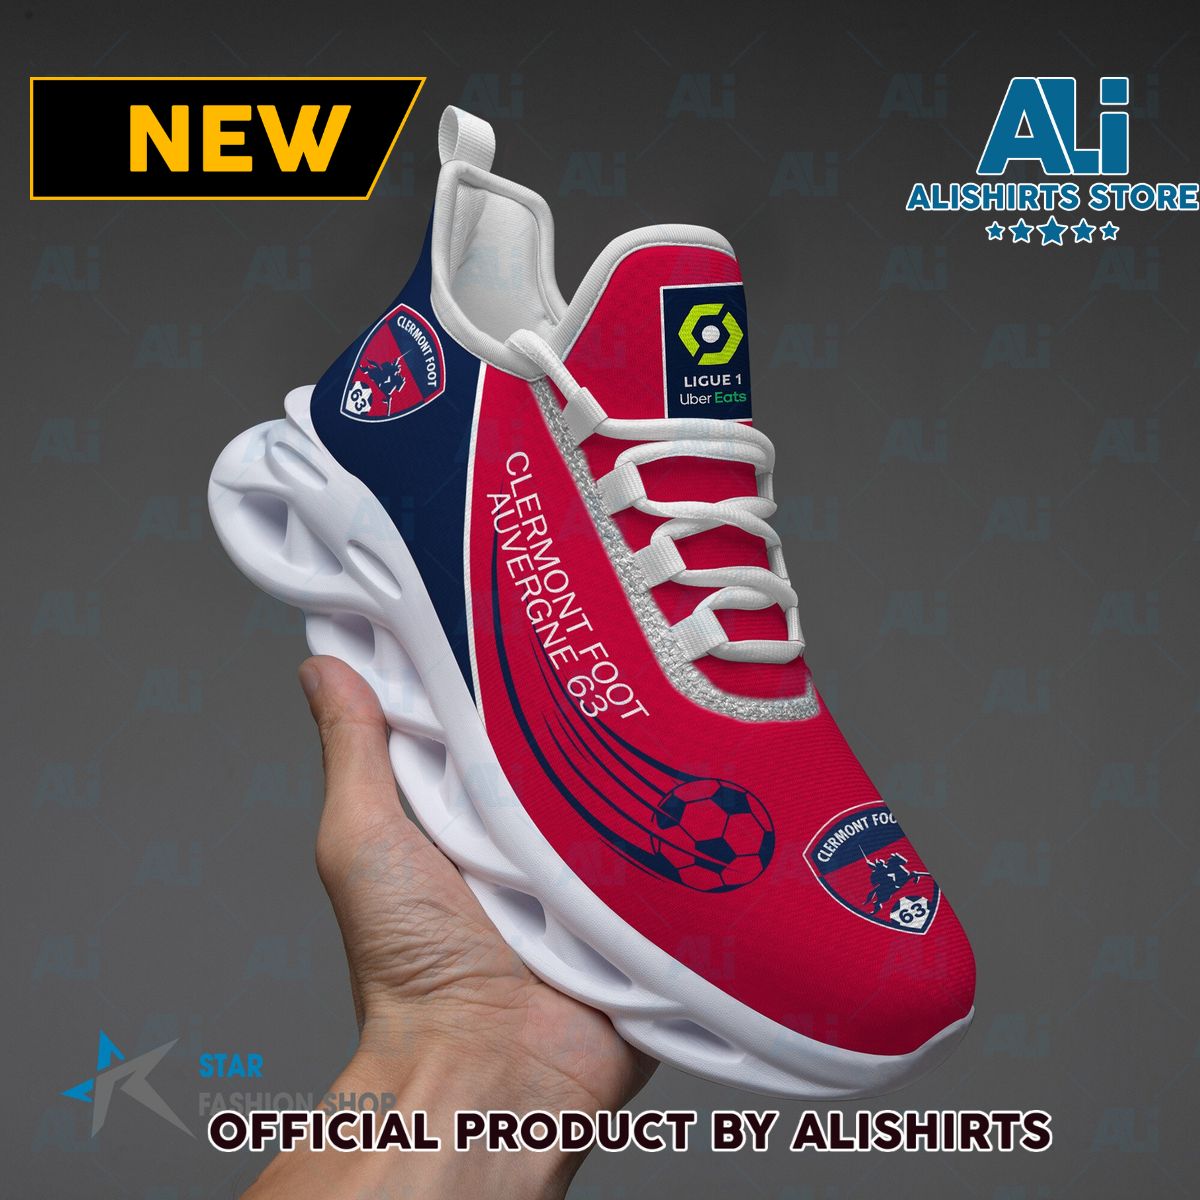 Clermont Foot Auvergne 63 French Football Running Tennis Shoe Maxsoul Sneaker